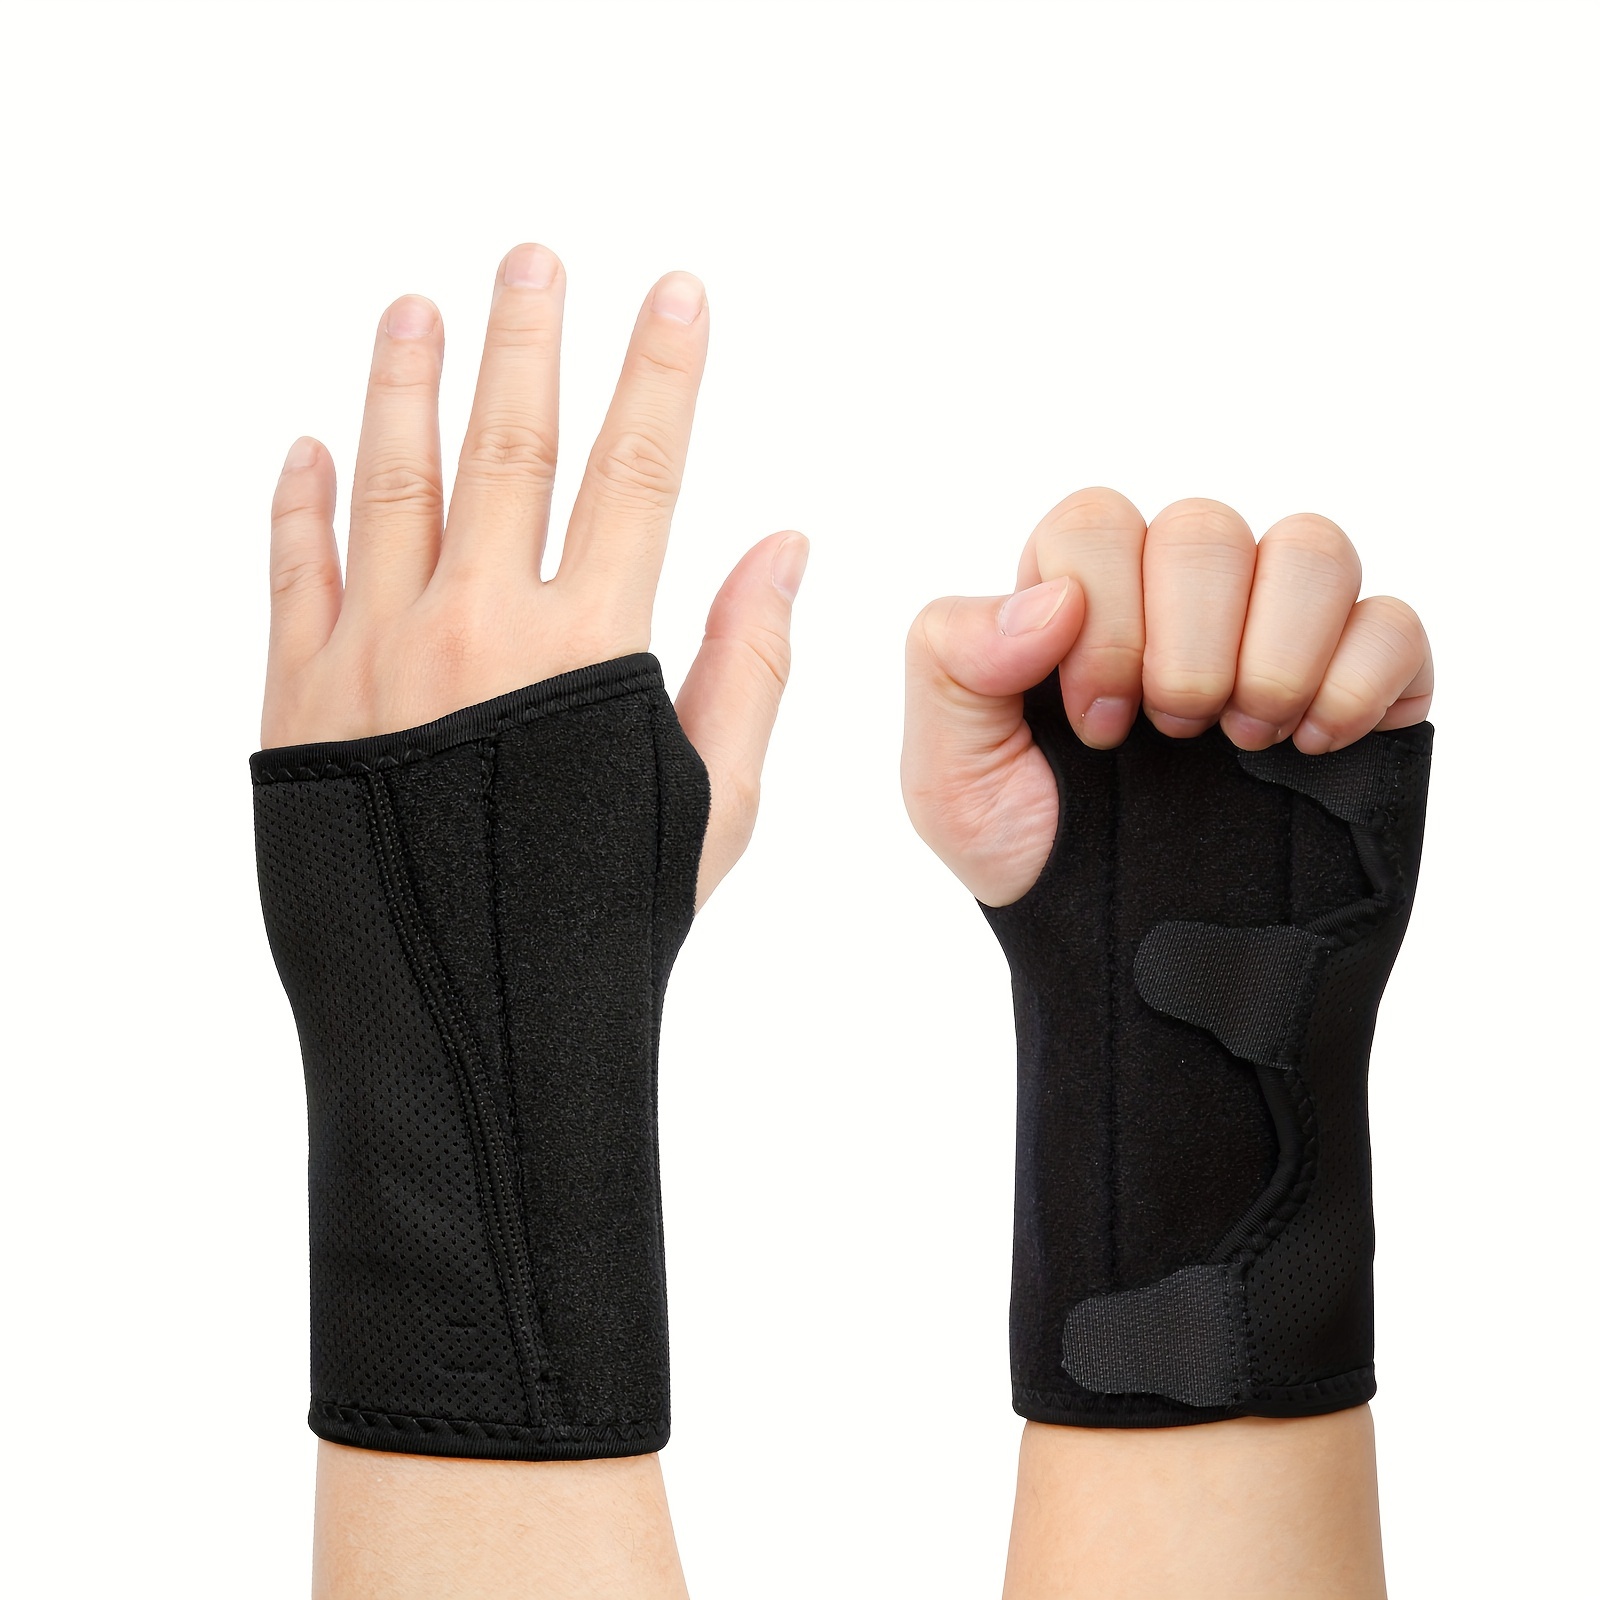  ARMSTRONG AMERIKA Wrist Brace For Carpal Tunnel Left